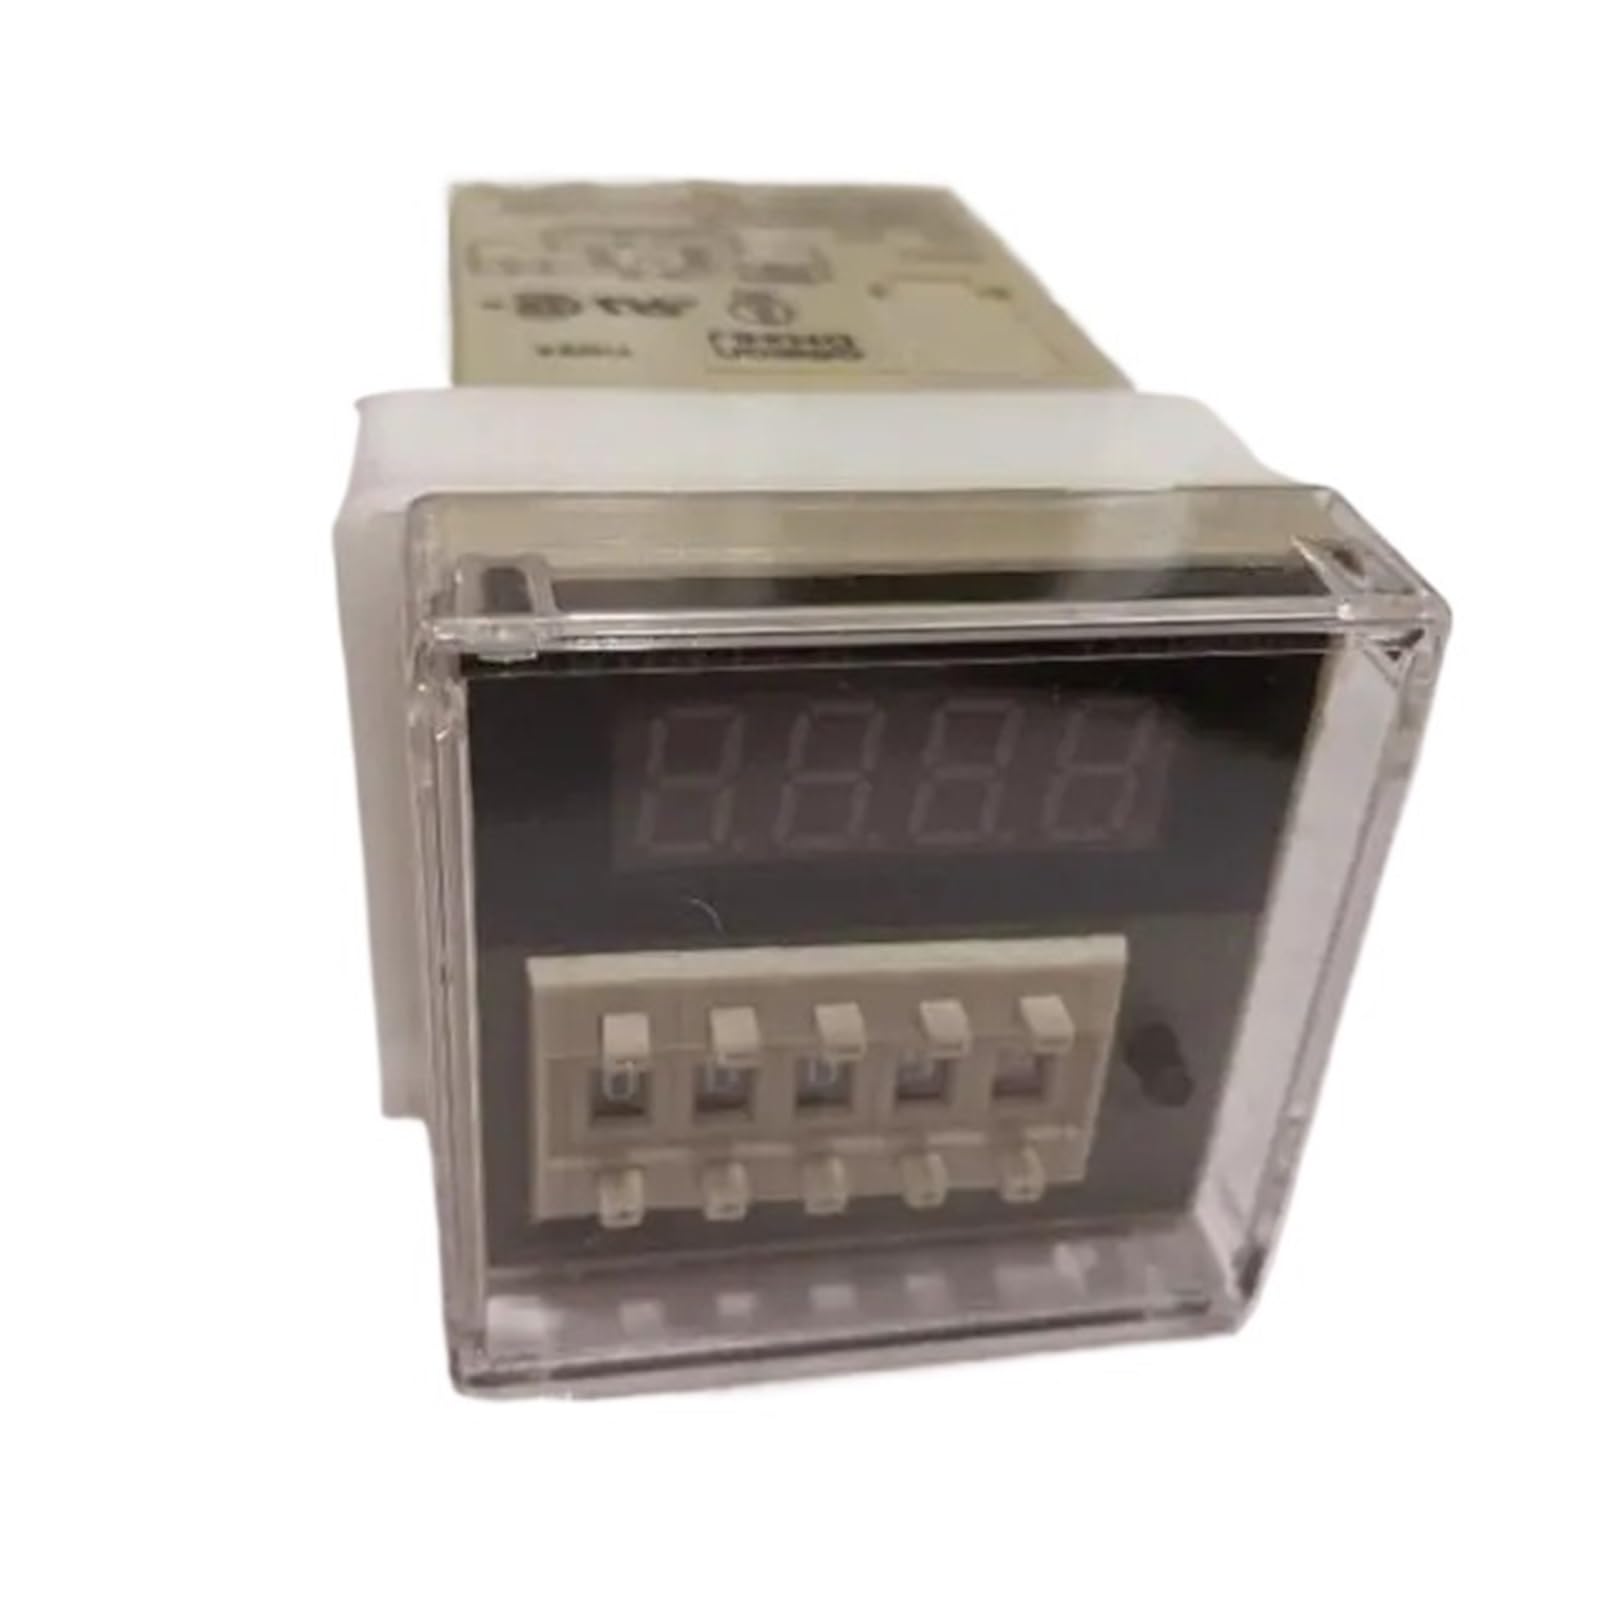 DH48J DH48J-A DH48J-11A 11PIN DH48J-8 DH48J-8A 8PIN Electronic preset counters acyclic display counters relay OTRYVBEHY(DH48J-8 8PIN,ACDC24-240V) von OTRYVBEHY